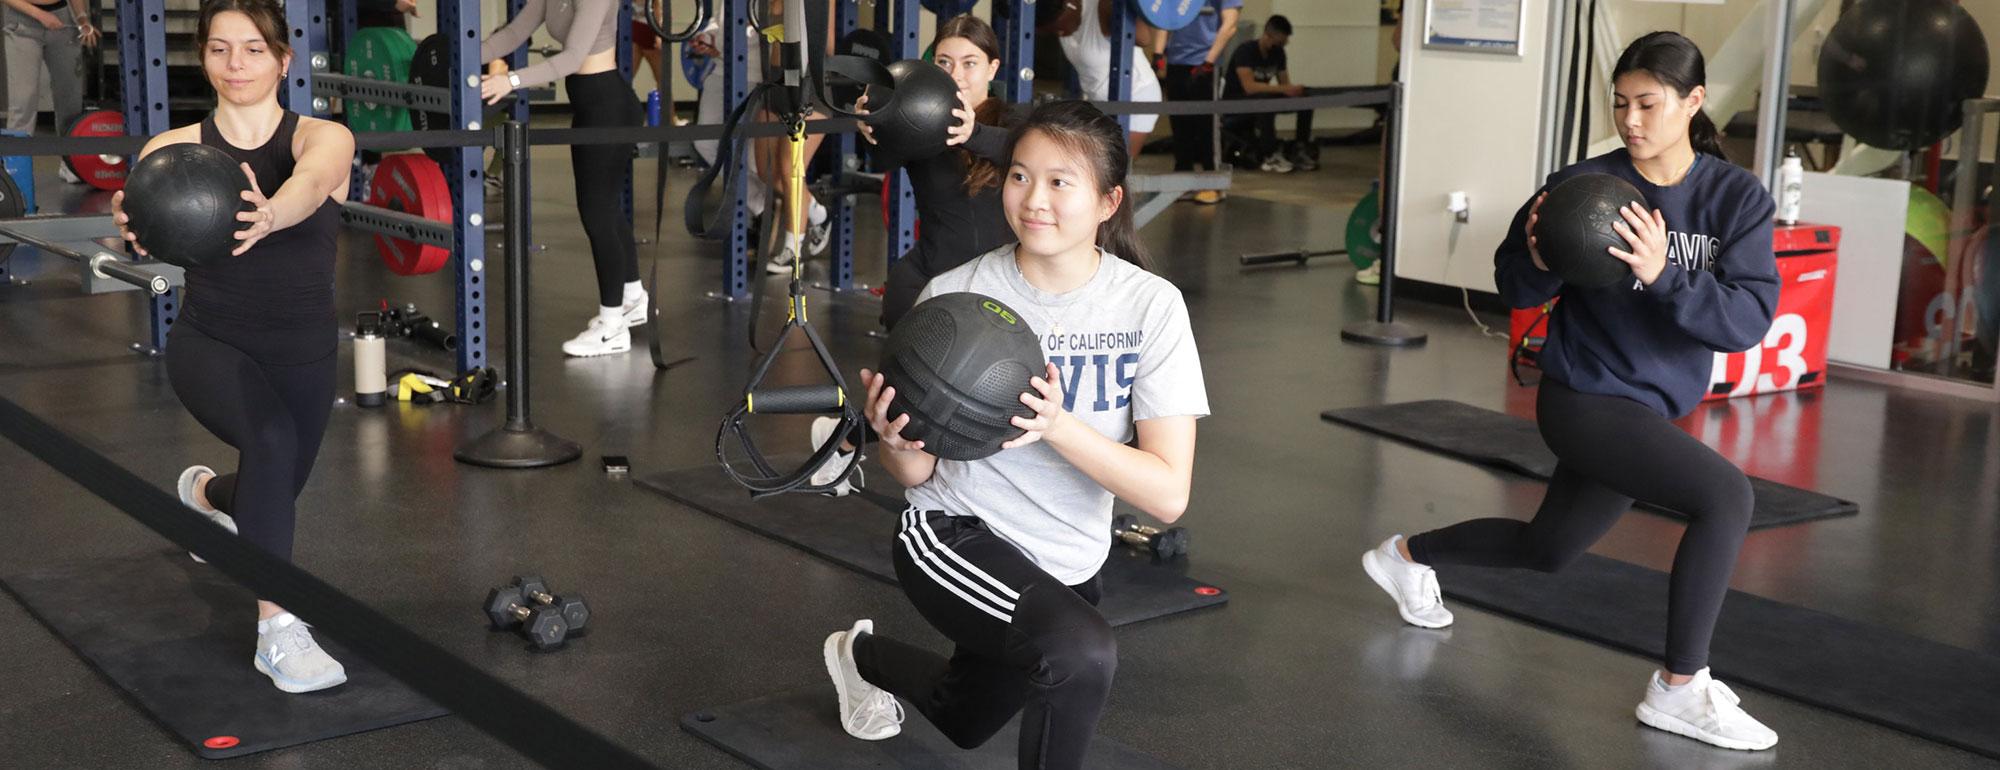 Students perform lunge exercise while holding medicine balls